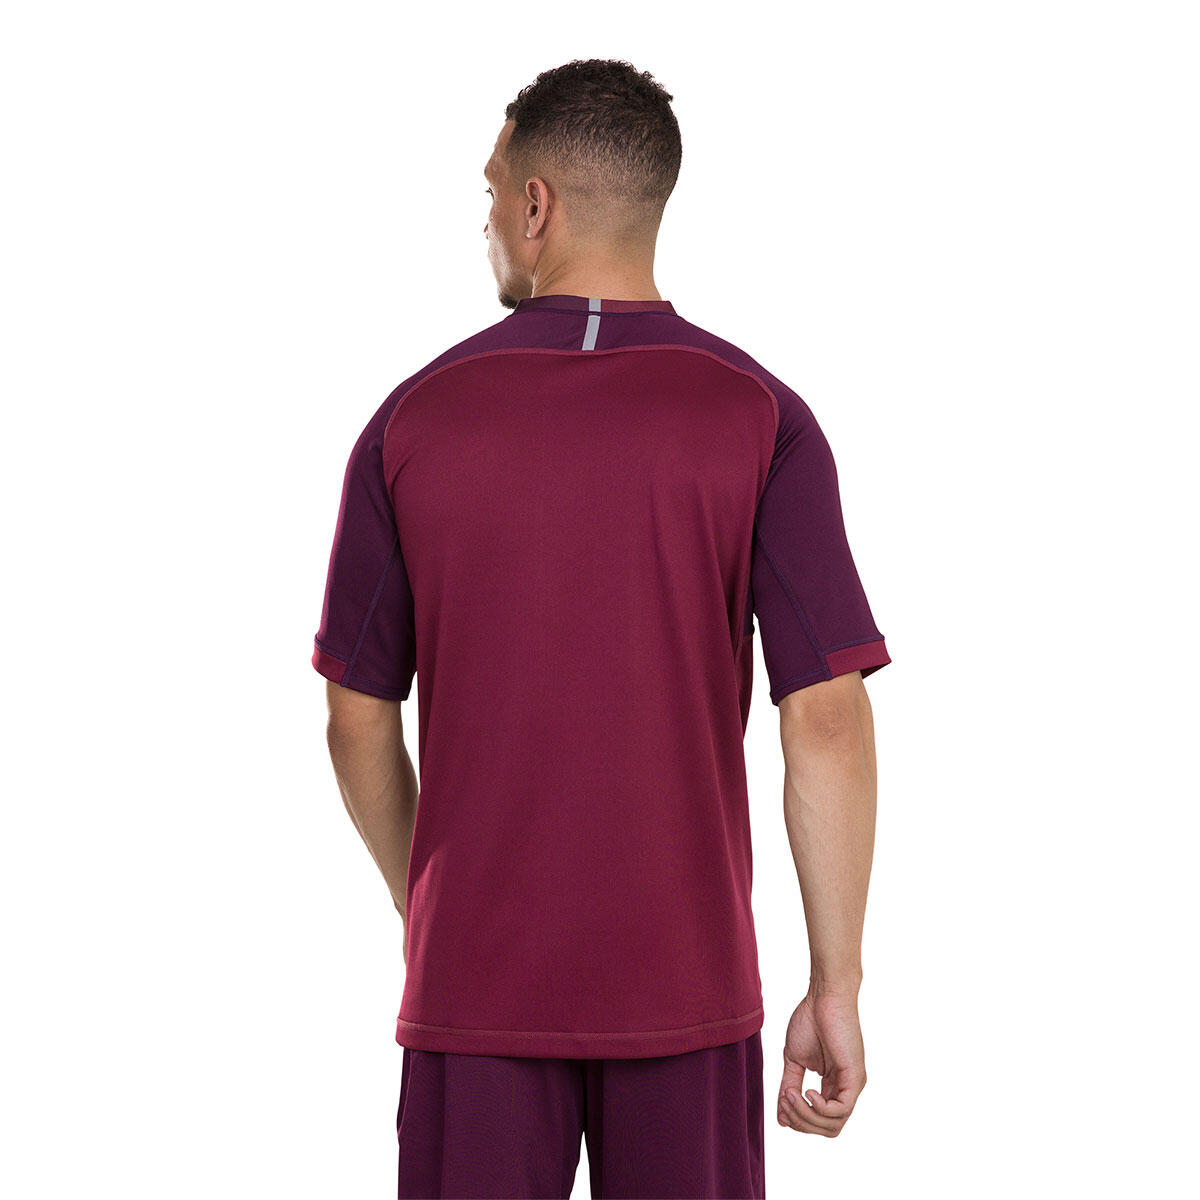 Adults Unisex Evader Jersey (Maroon) 2/3